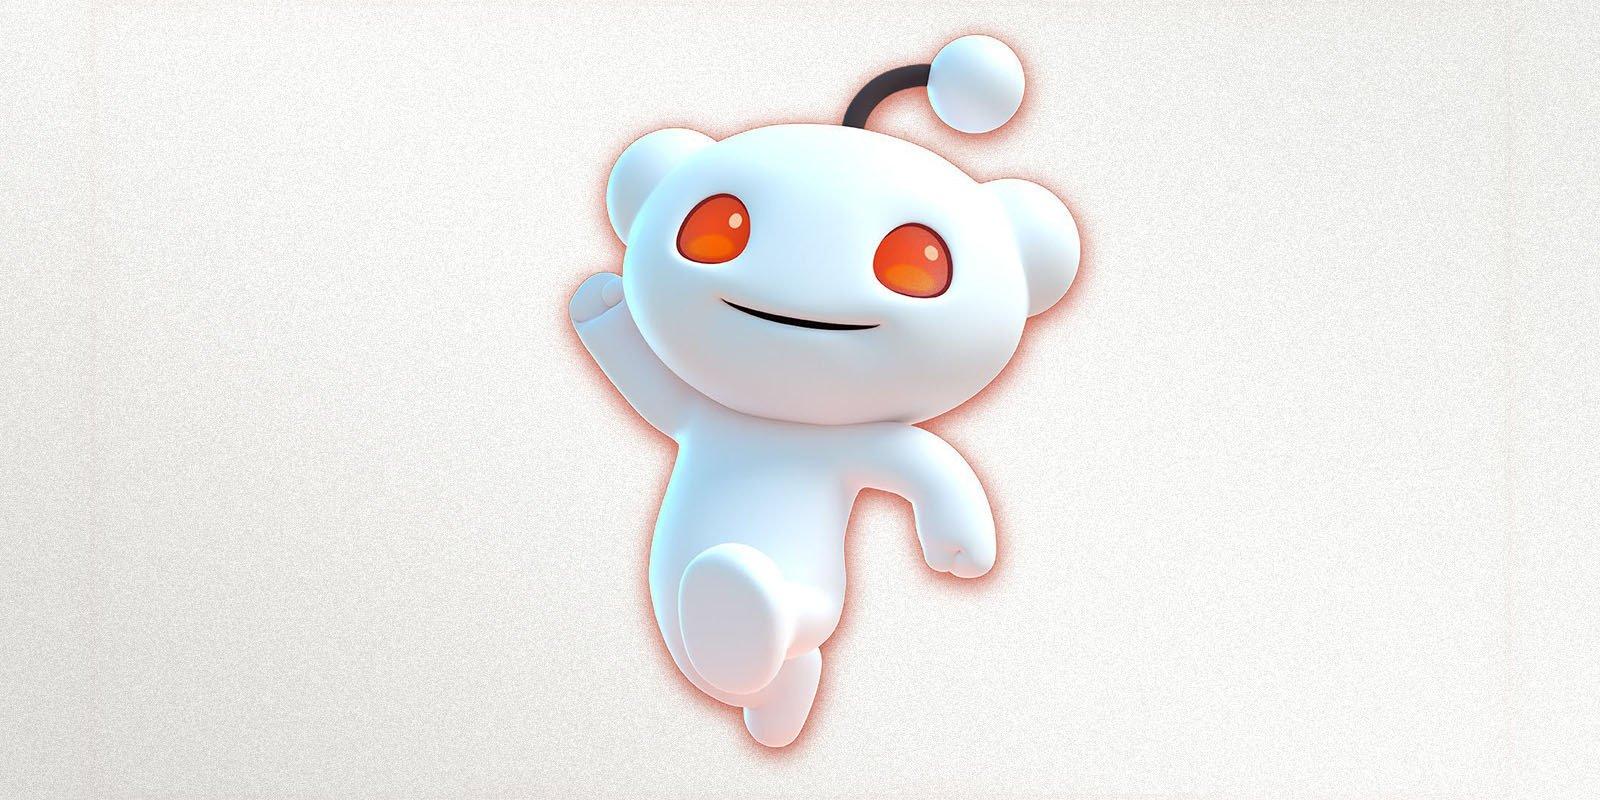 Reddit’s Taking Its Own Wall Street Bet And Listing On The Public Market